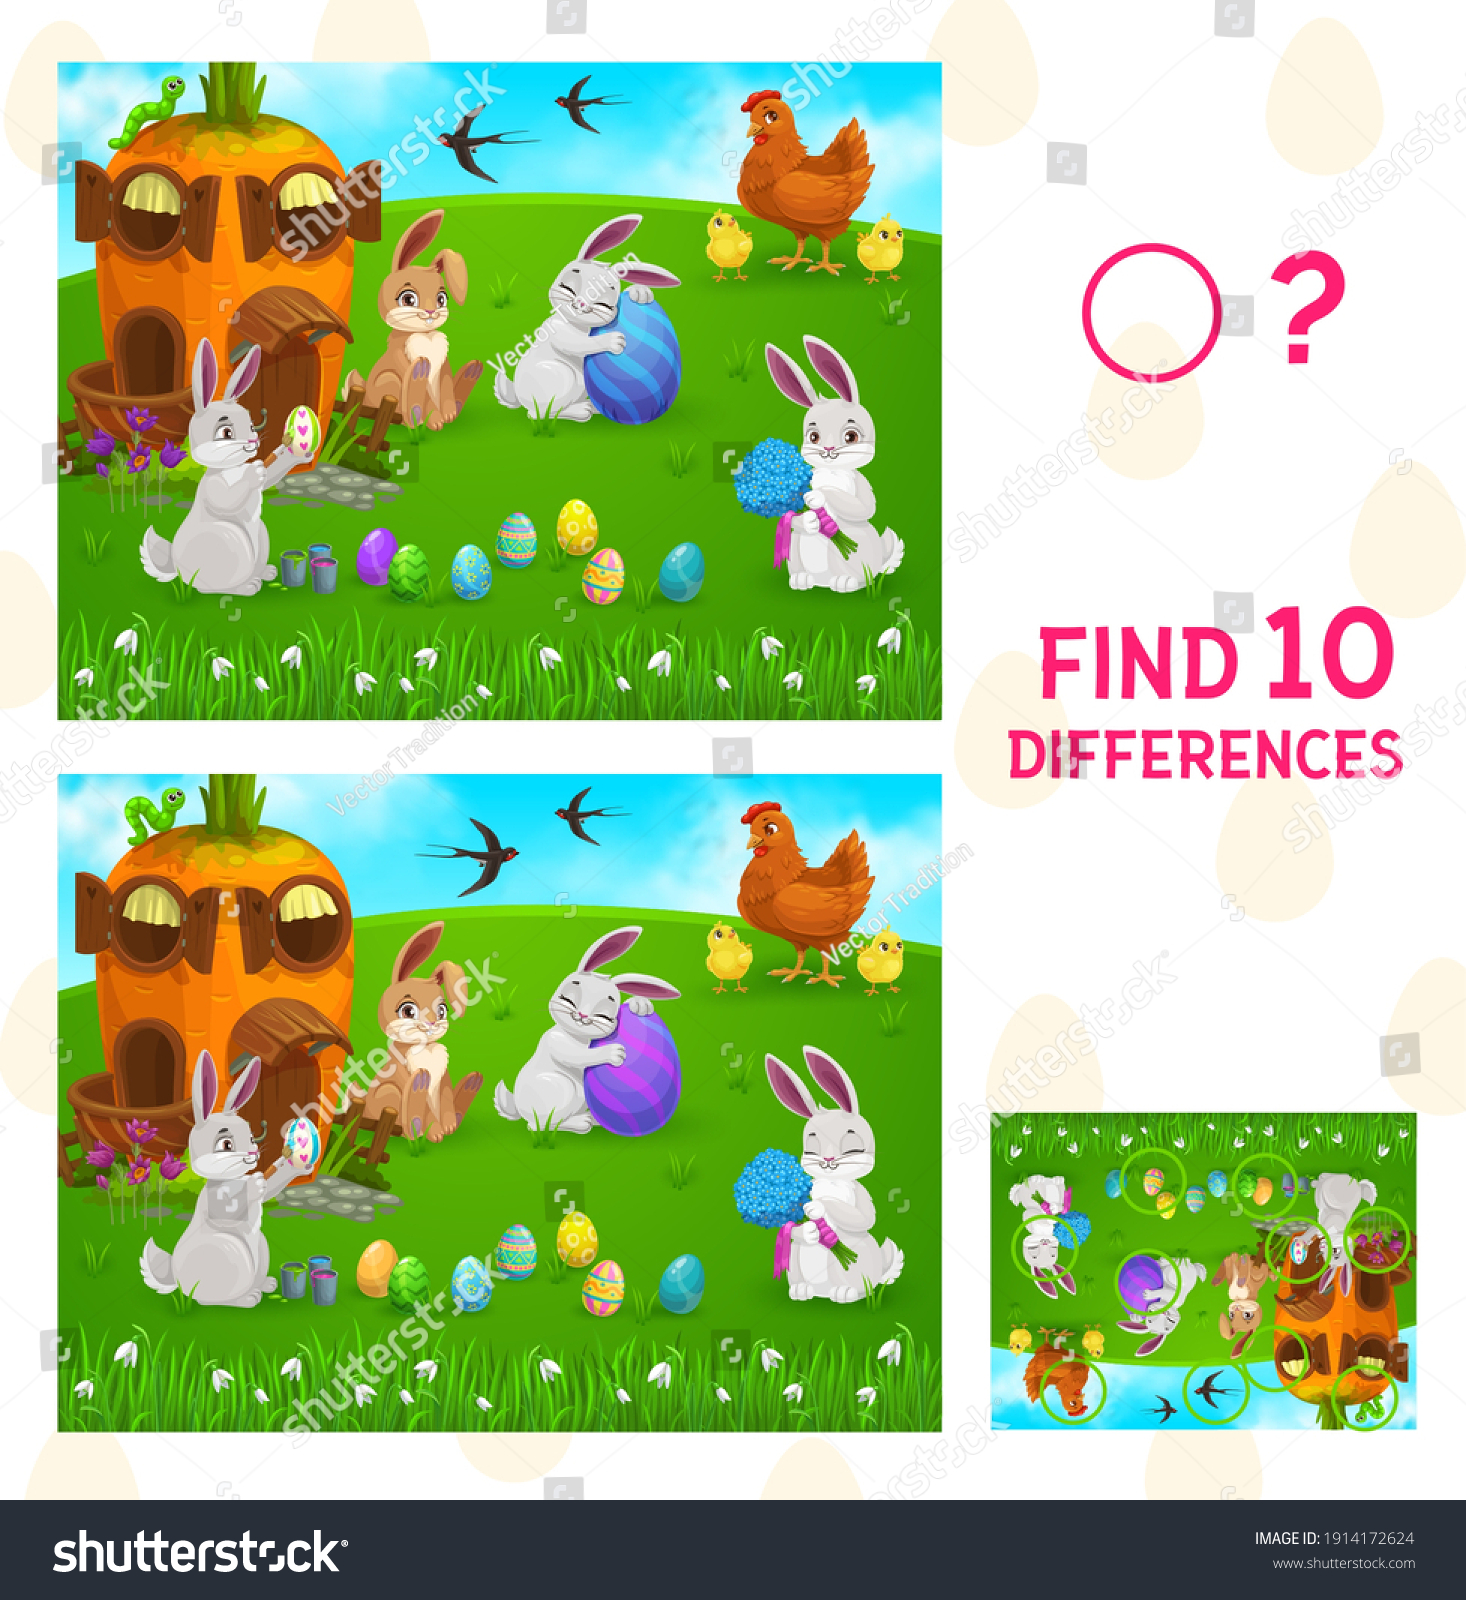 Find differences kids game with vector Easter egg hunt. Children education puzzle or spot 10 differences worksheet template with cartoon Easter bunnies, painted eggs, spring green grass and flowers #1914172624